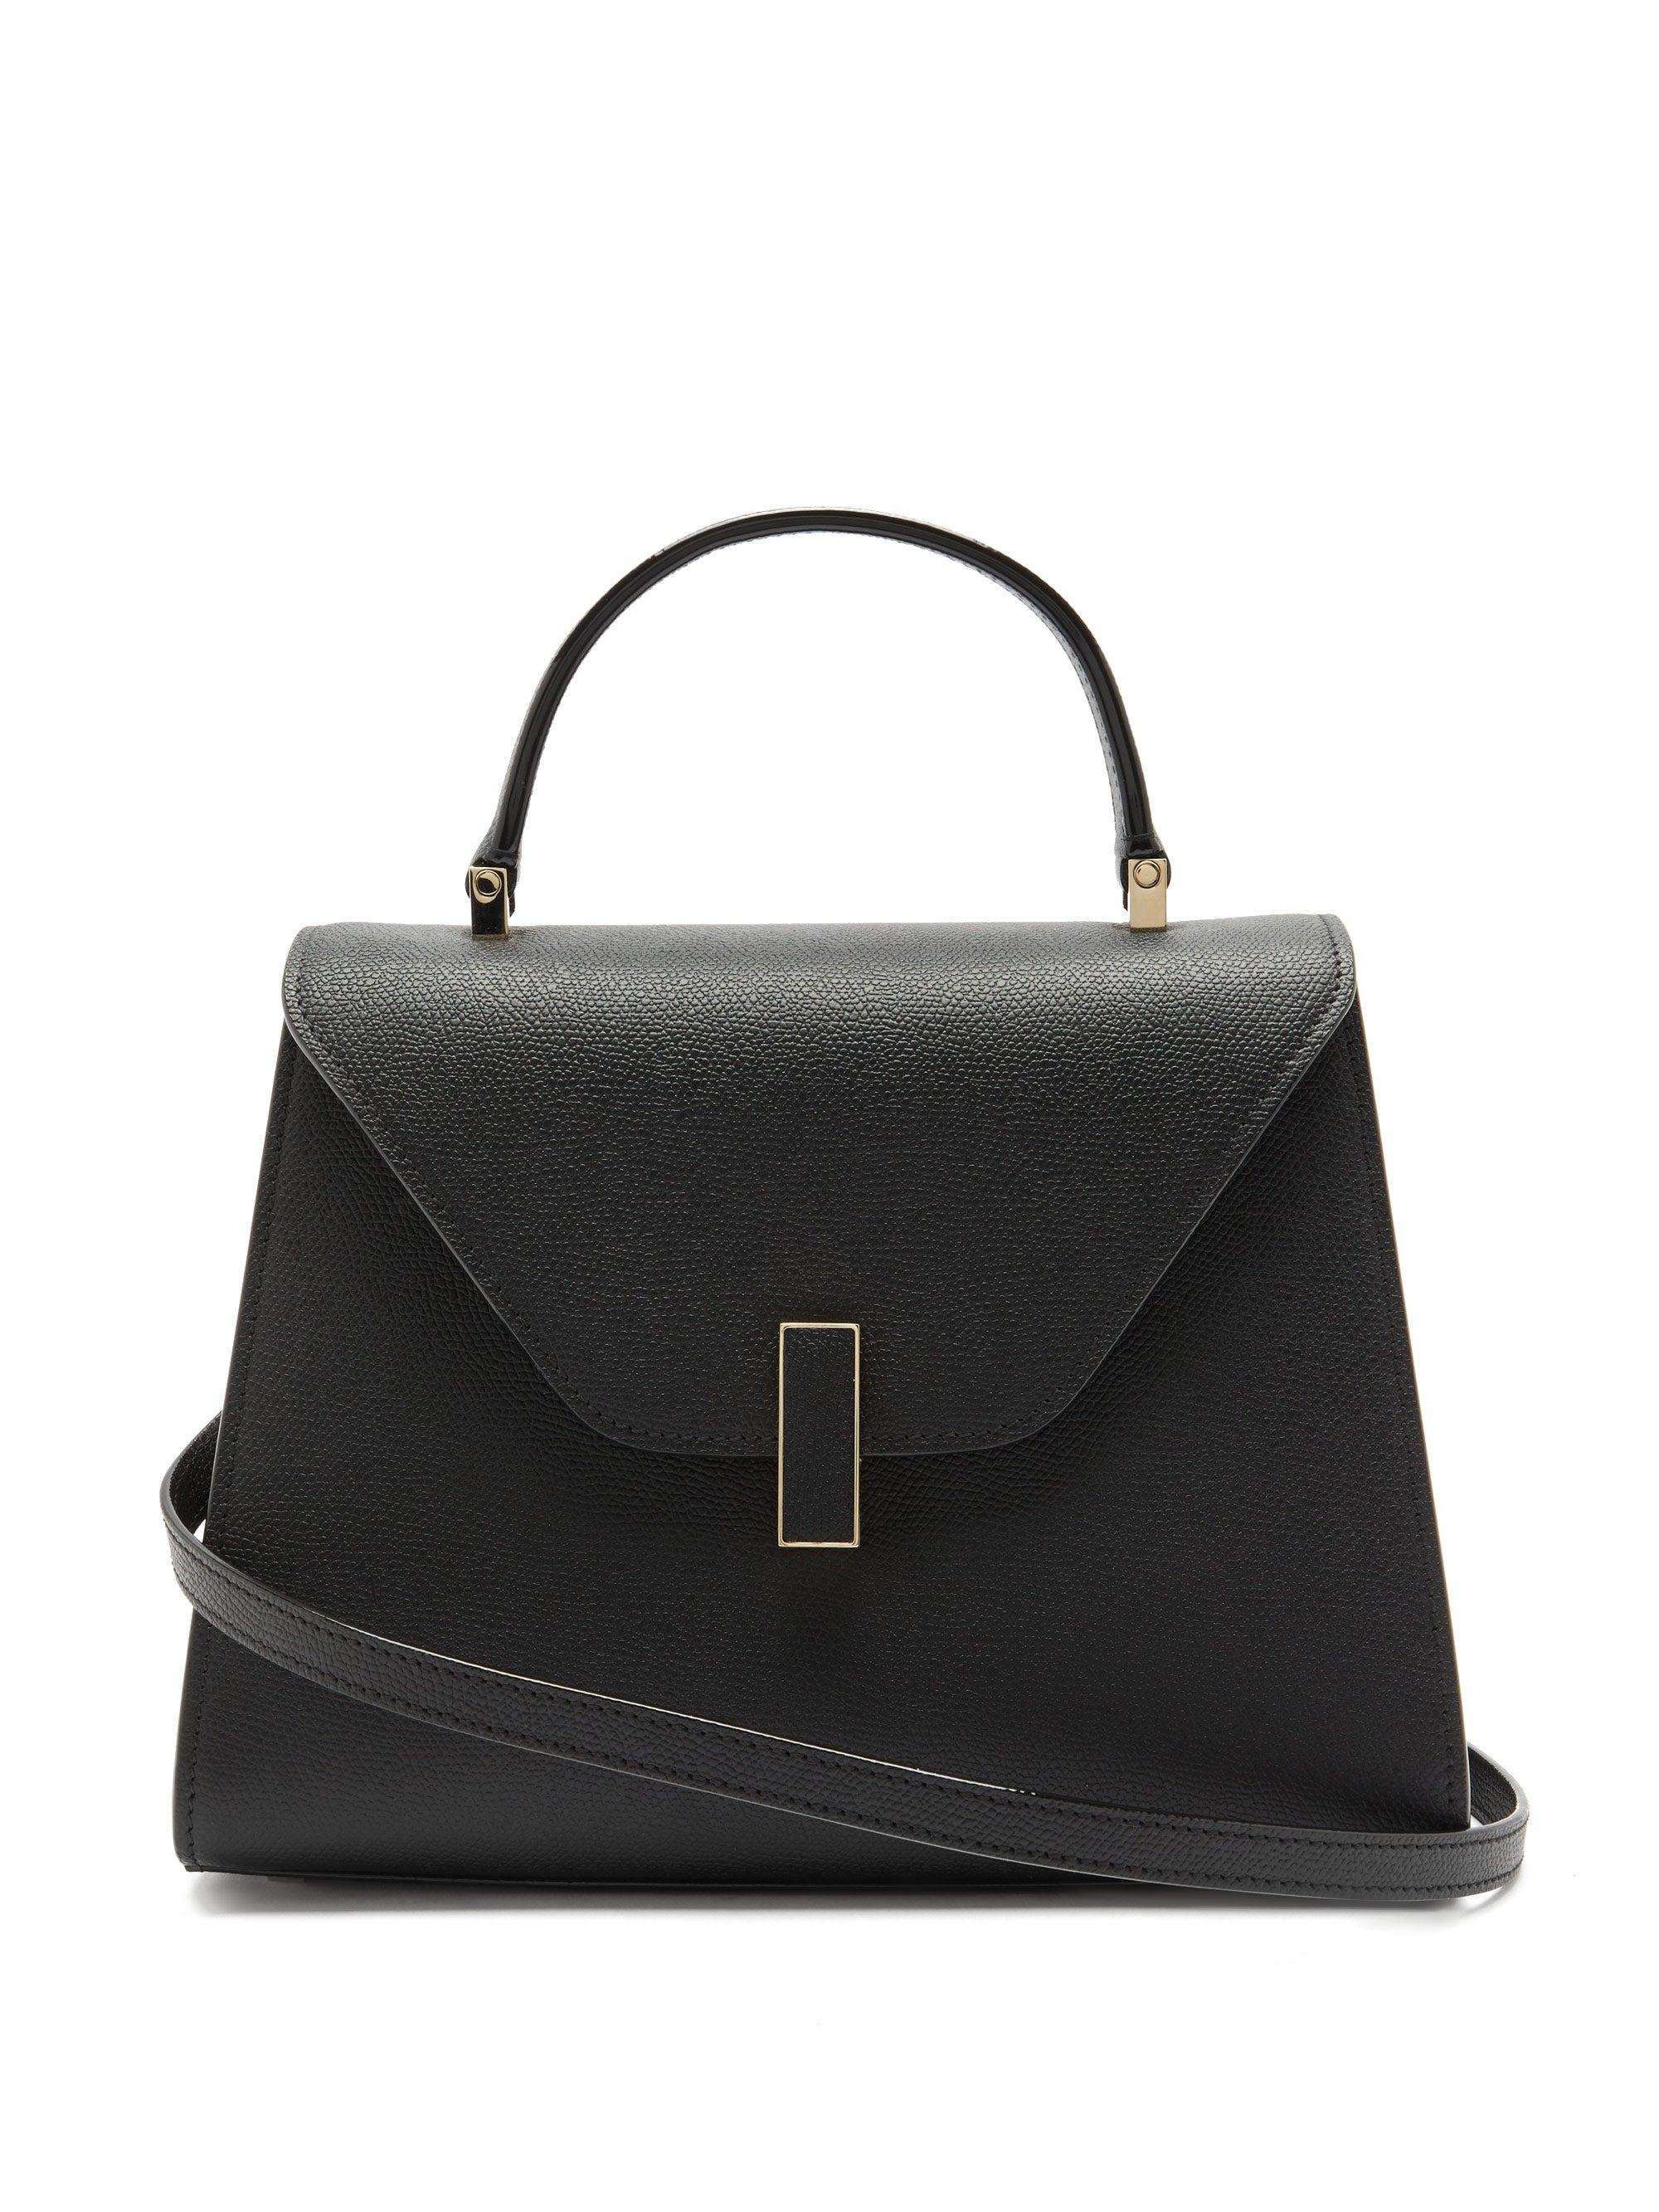 Valextra Iside Medium Grained-leather Bag in Black - Lyst